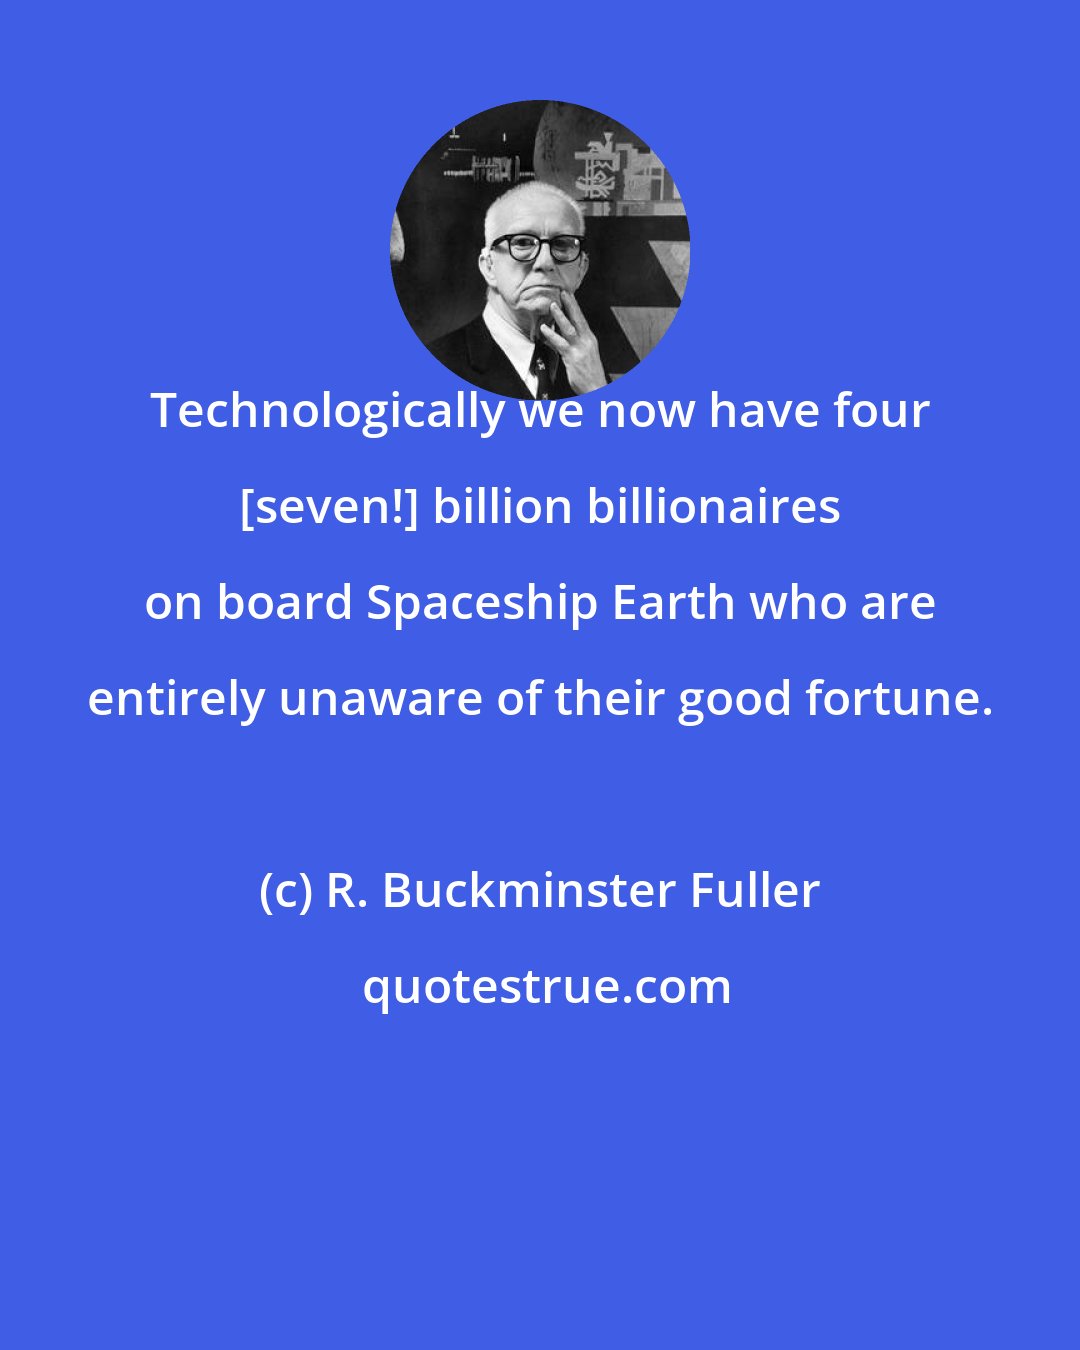 R. Buckminster Fuller: Technologically we now have four [seven!] billion billionaires on board Spaceship Earth who are entirely unaware of their good fortune.